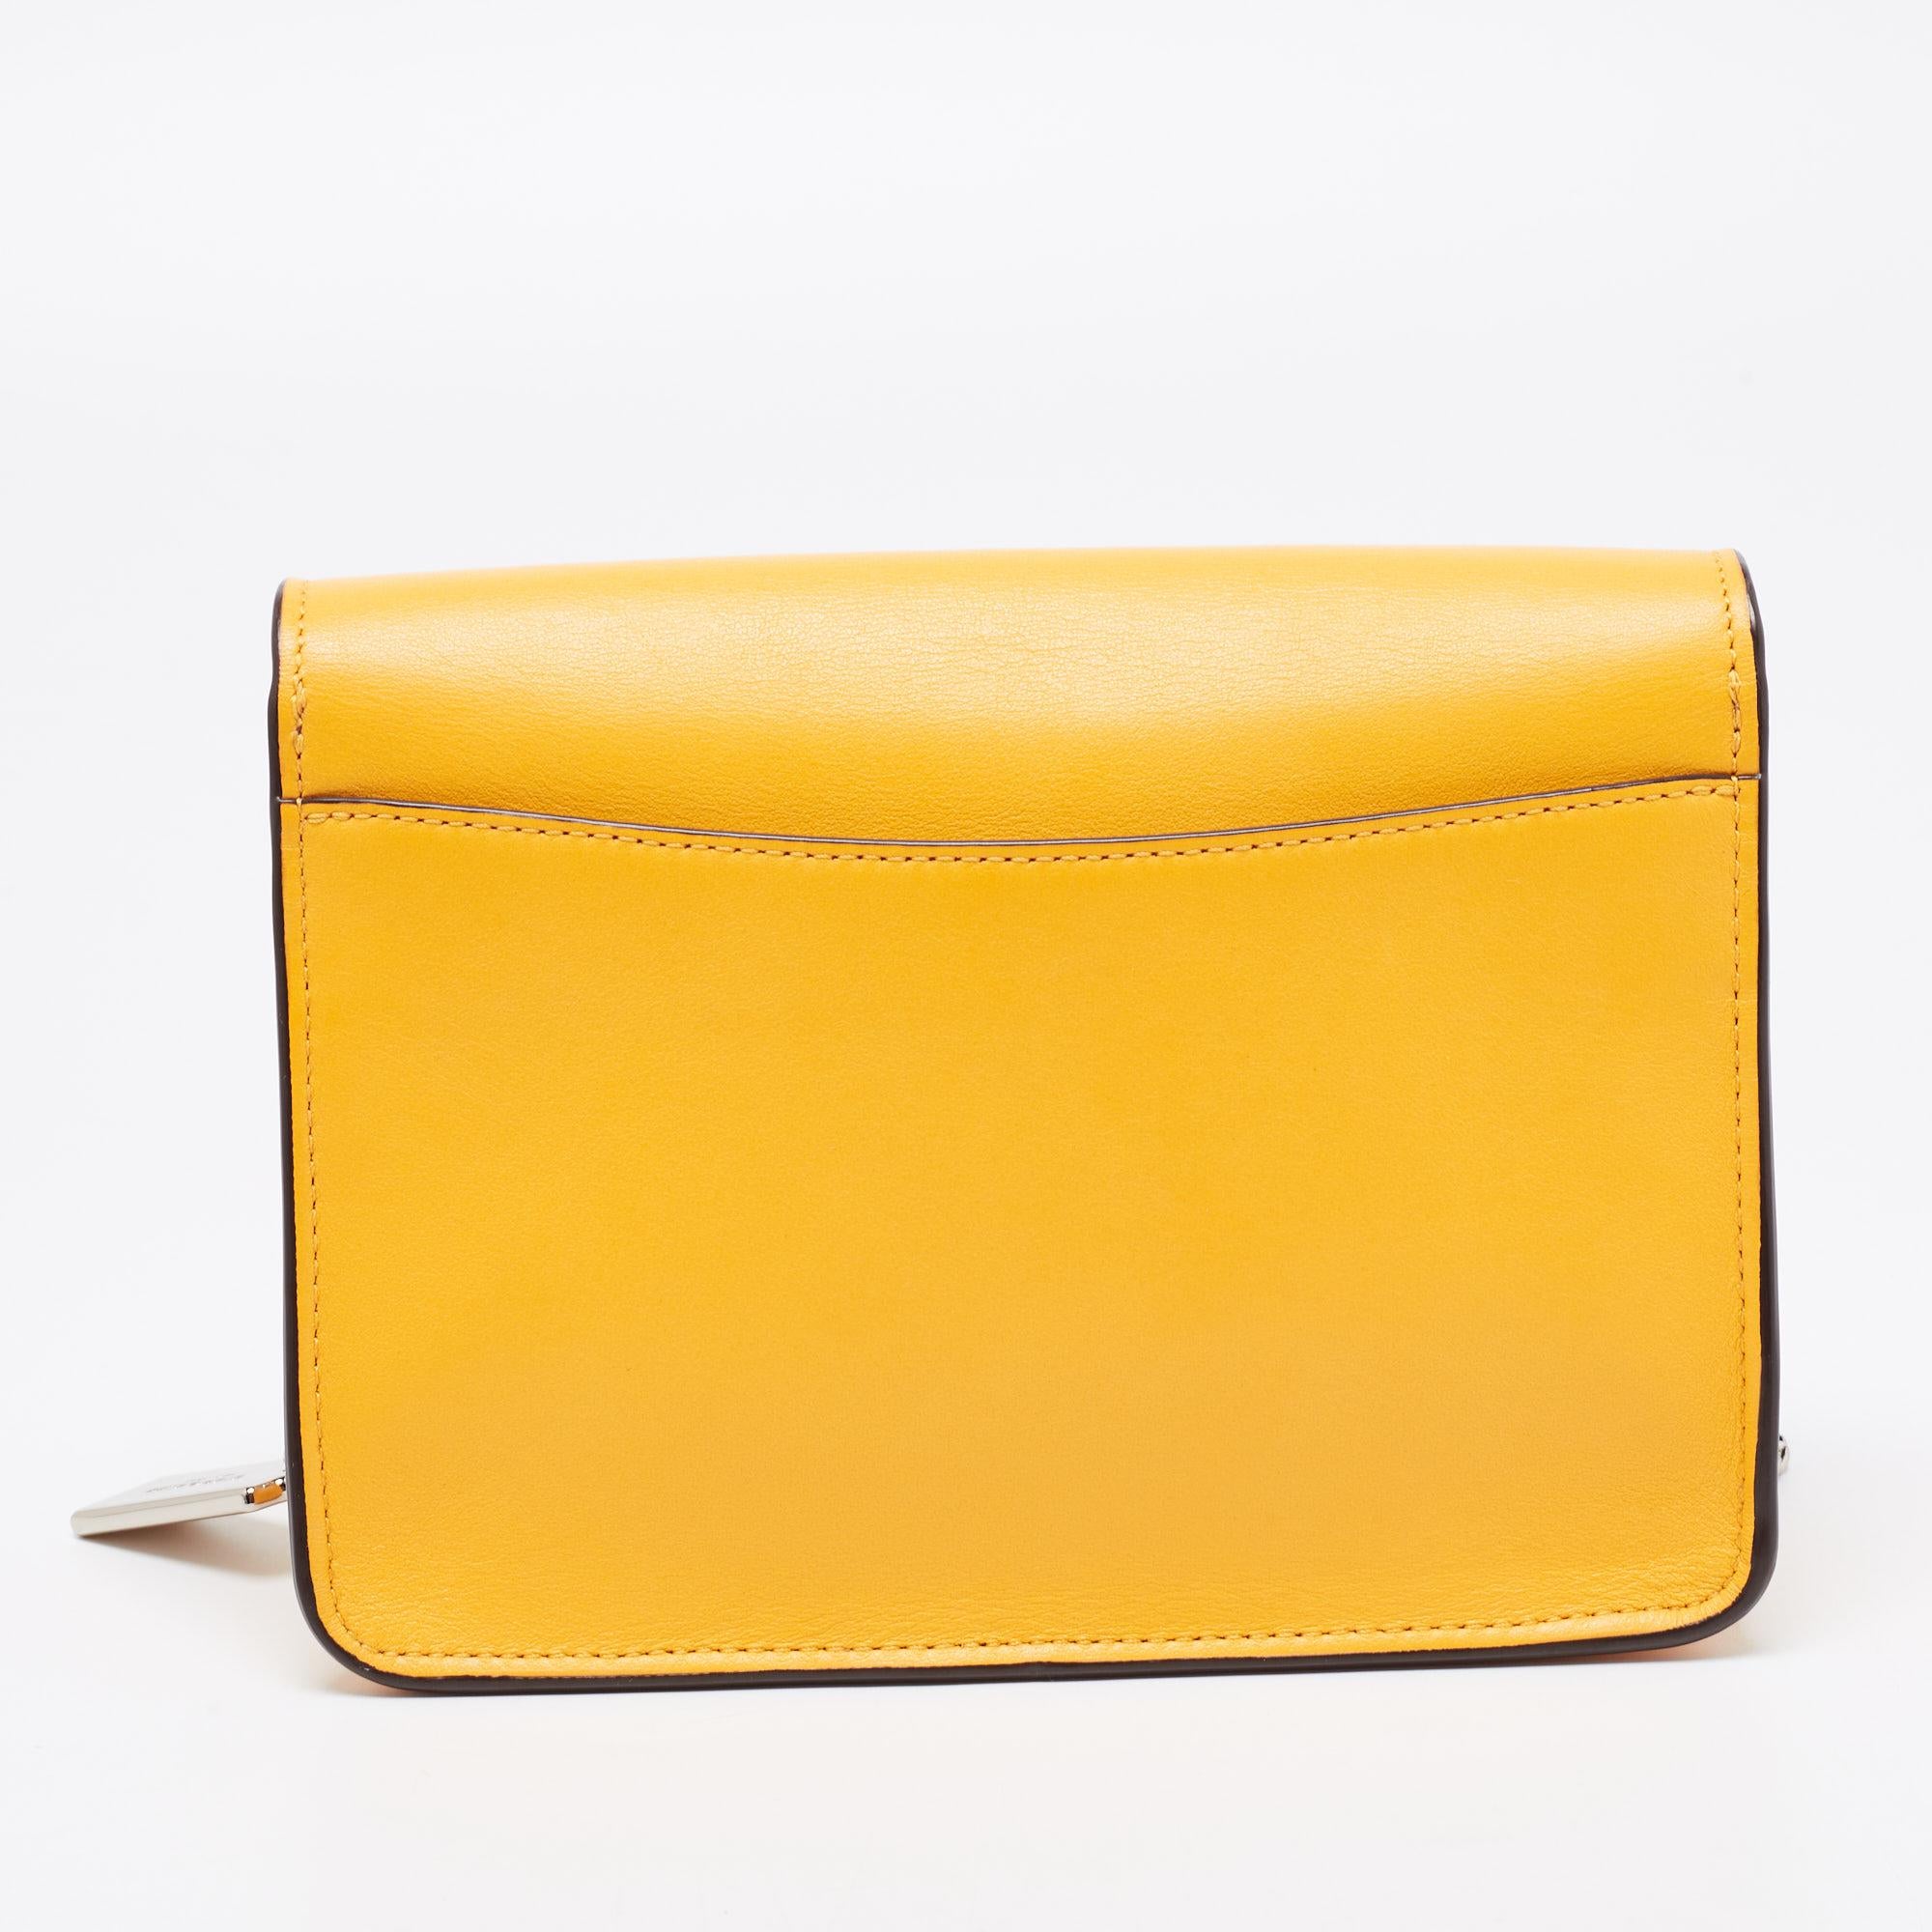 Elegance meets luxury in this Bowery shoulder bag from the House of Coach. It is created using mustard leather, with a lock closure perched on the front. It features an Alcantara-lined interior, silver-tone hardware, and a sturdy chain strap. This